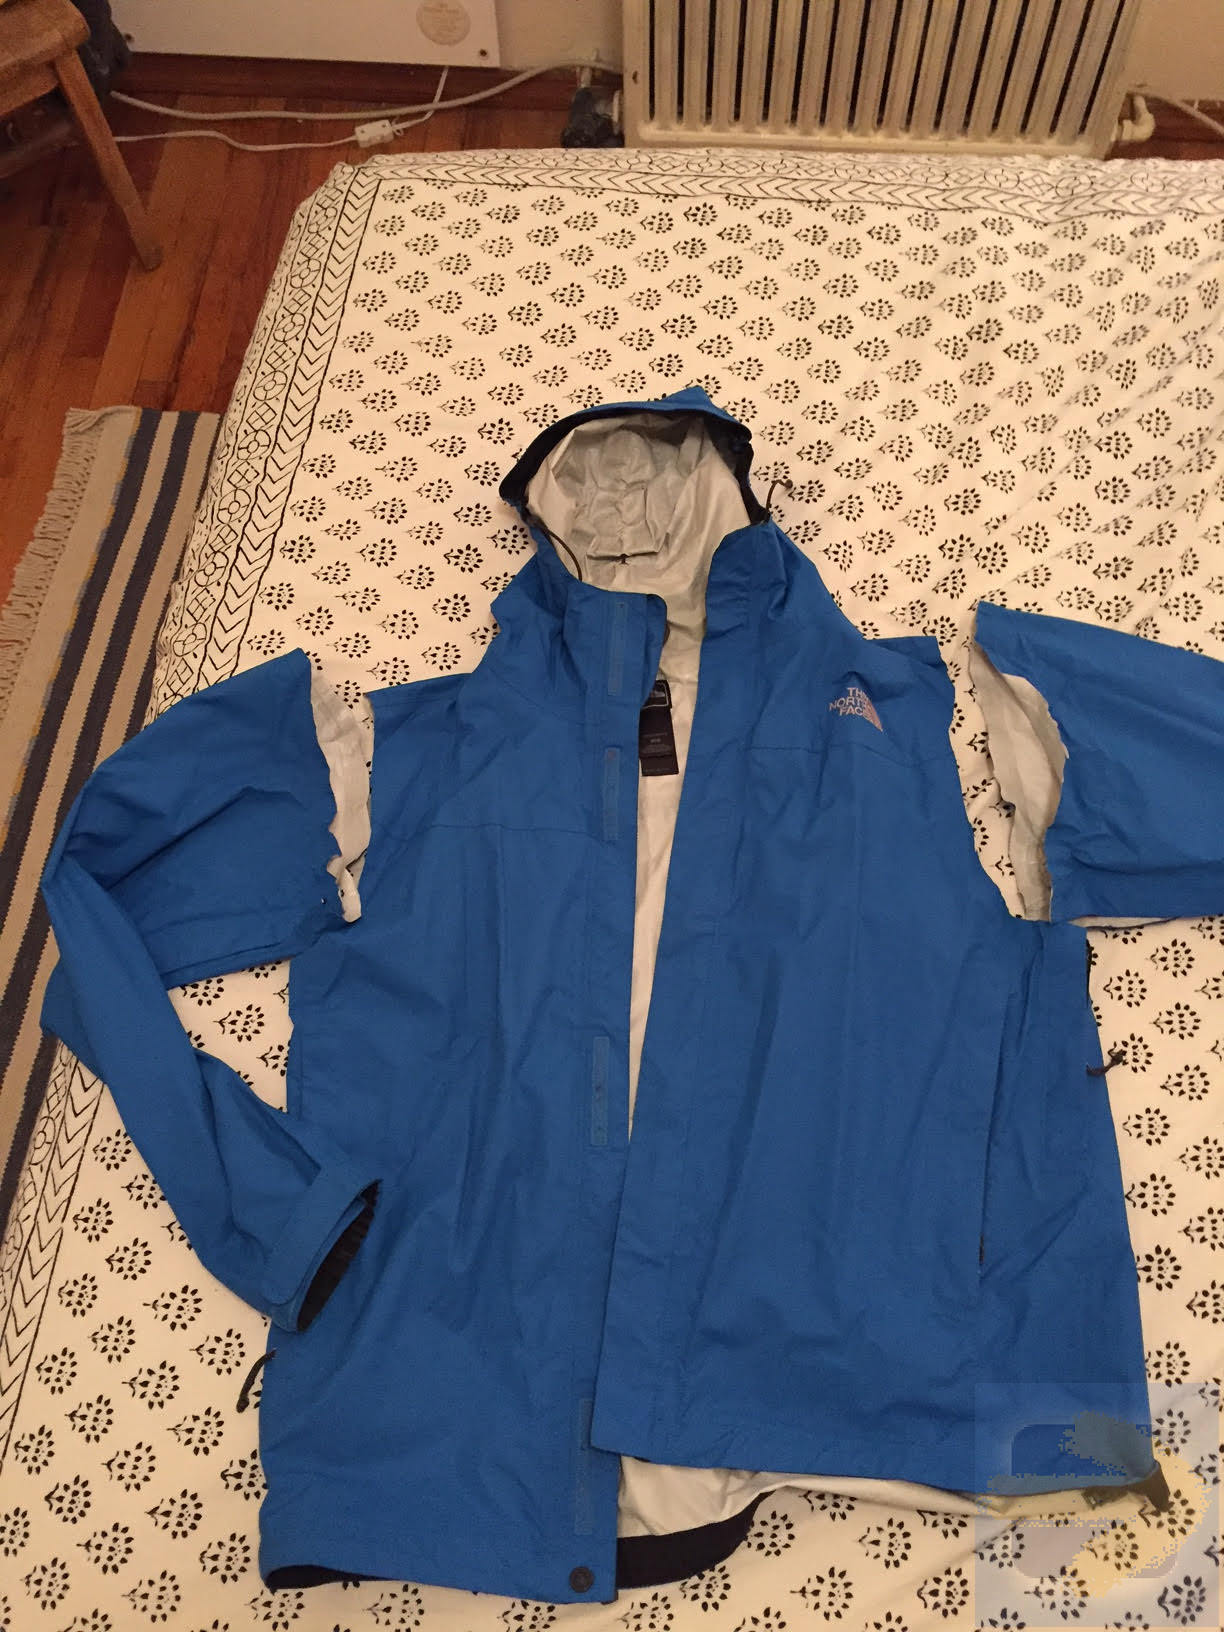 cut the sleaves off an old rain jacket